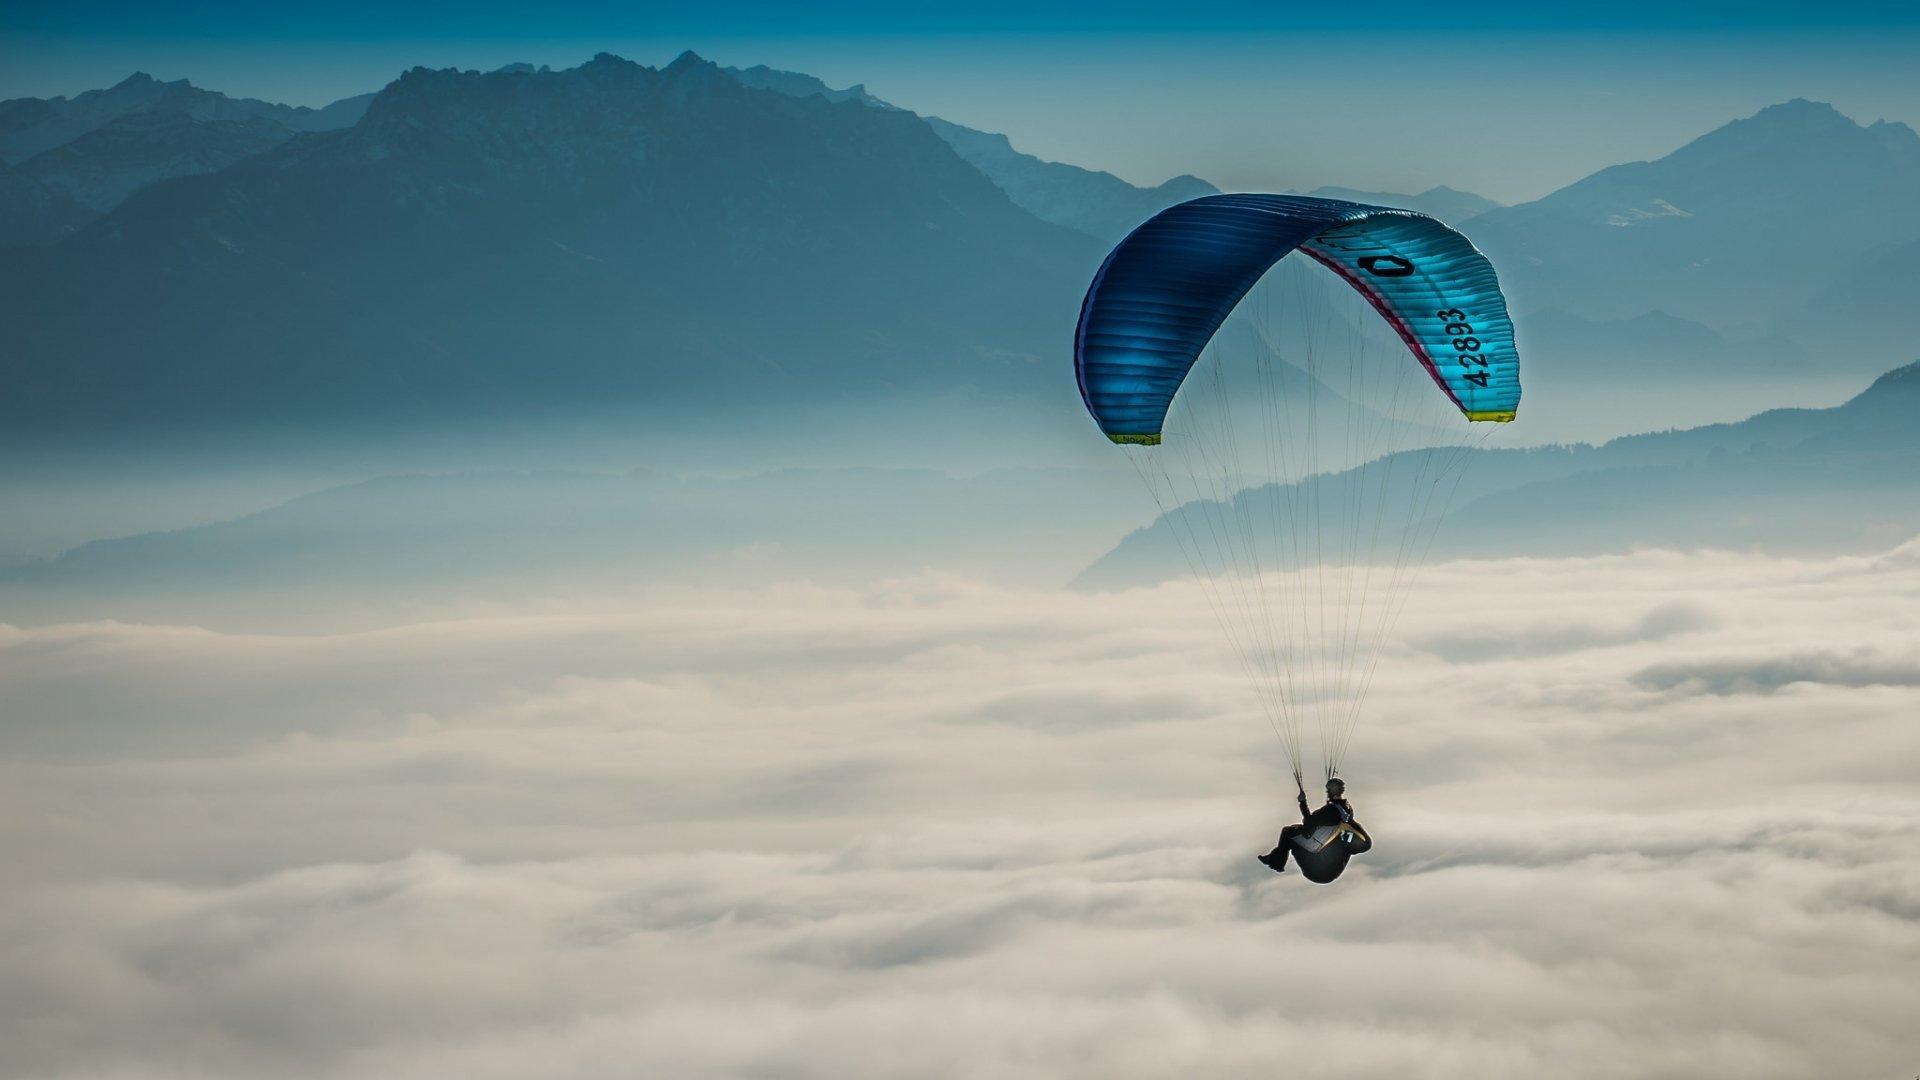 Hang Gliding above the Clouds HD Wallpaper. Background Image